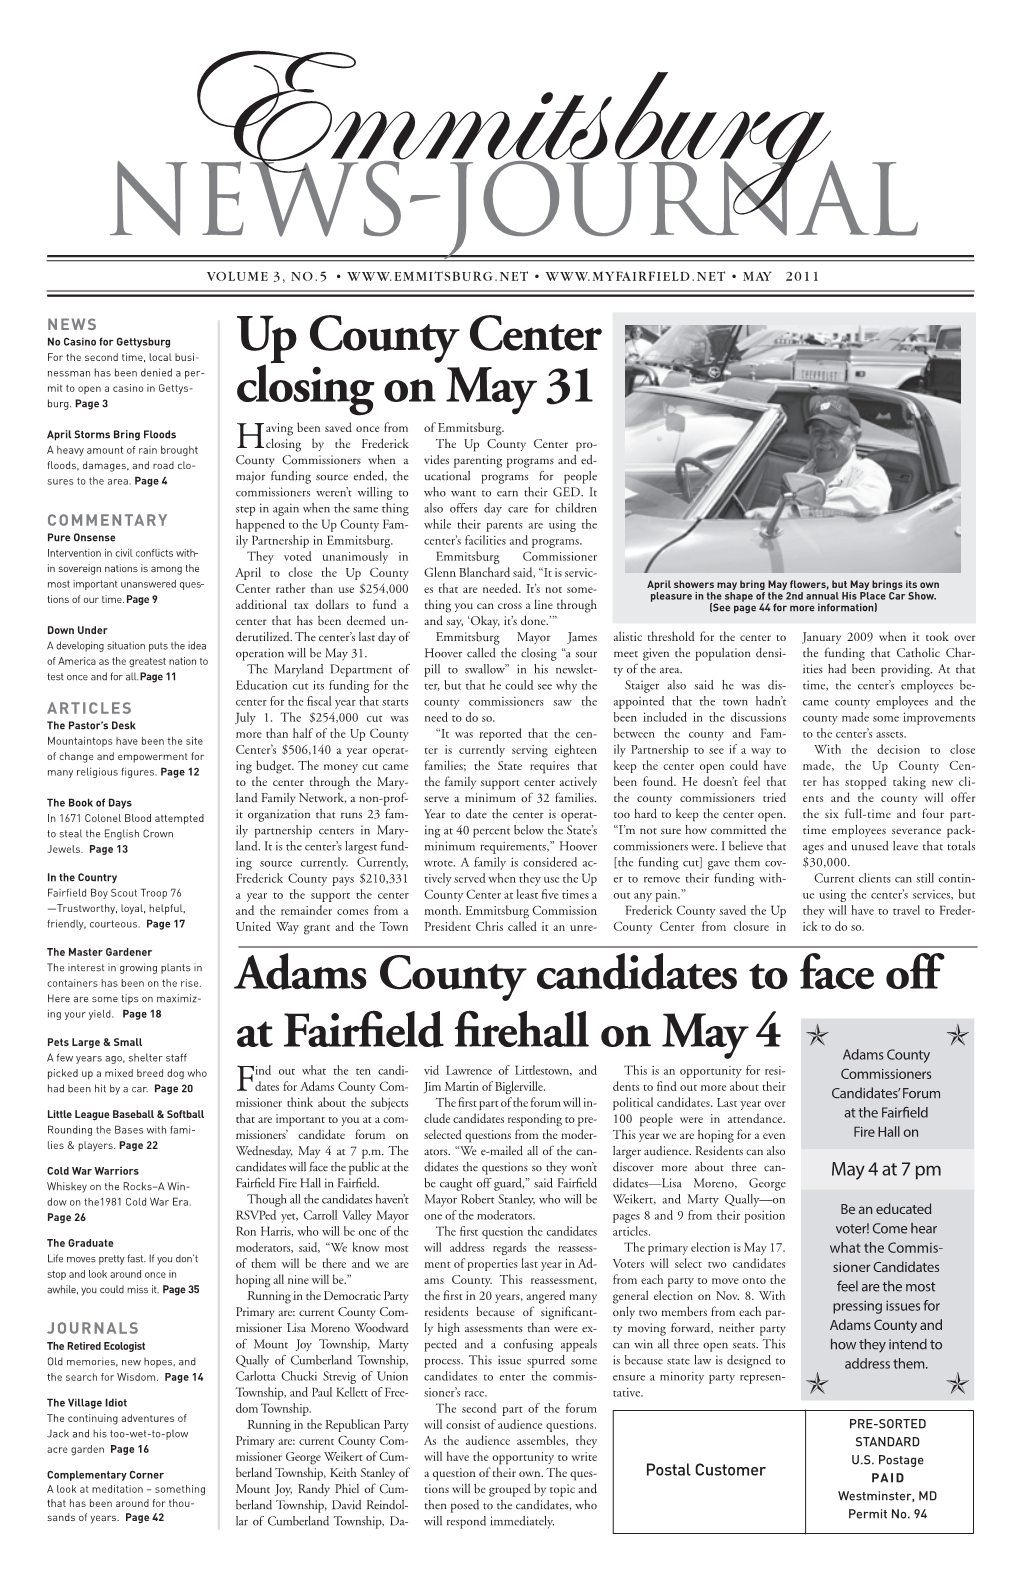 Up County Center Closing on May 31